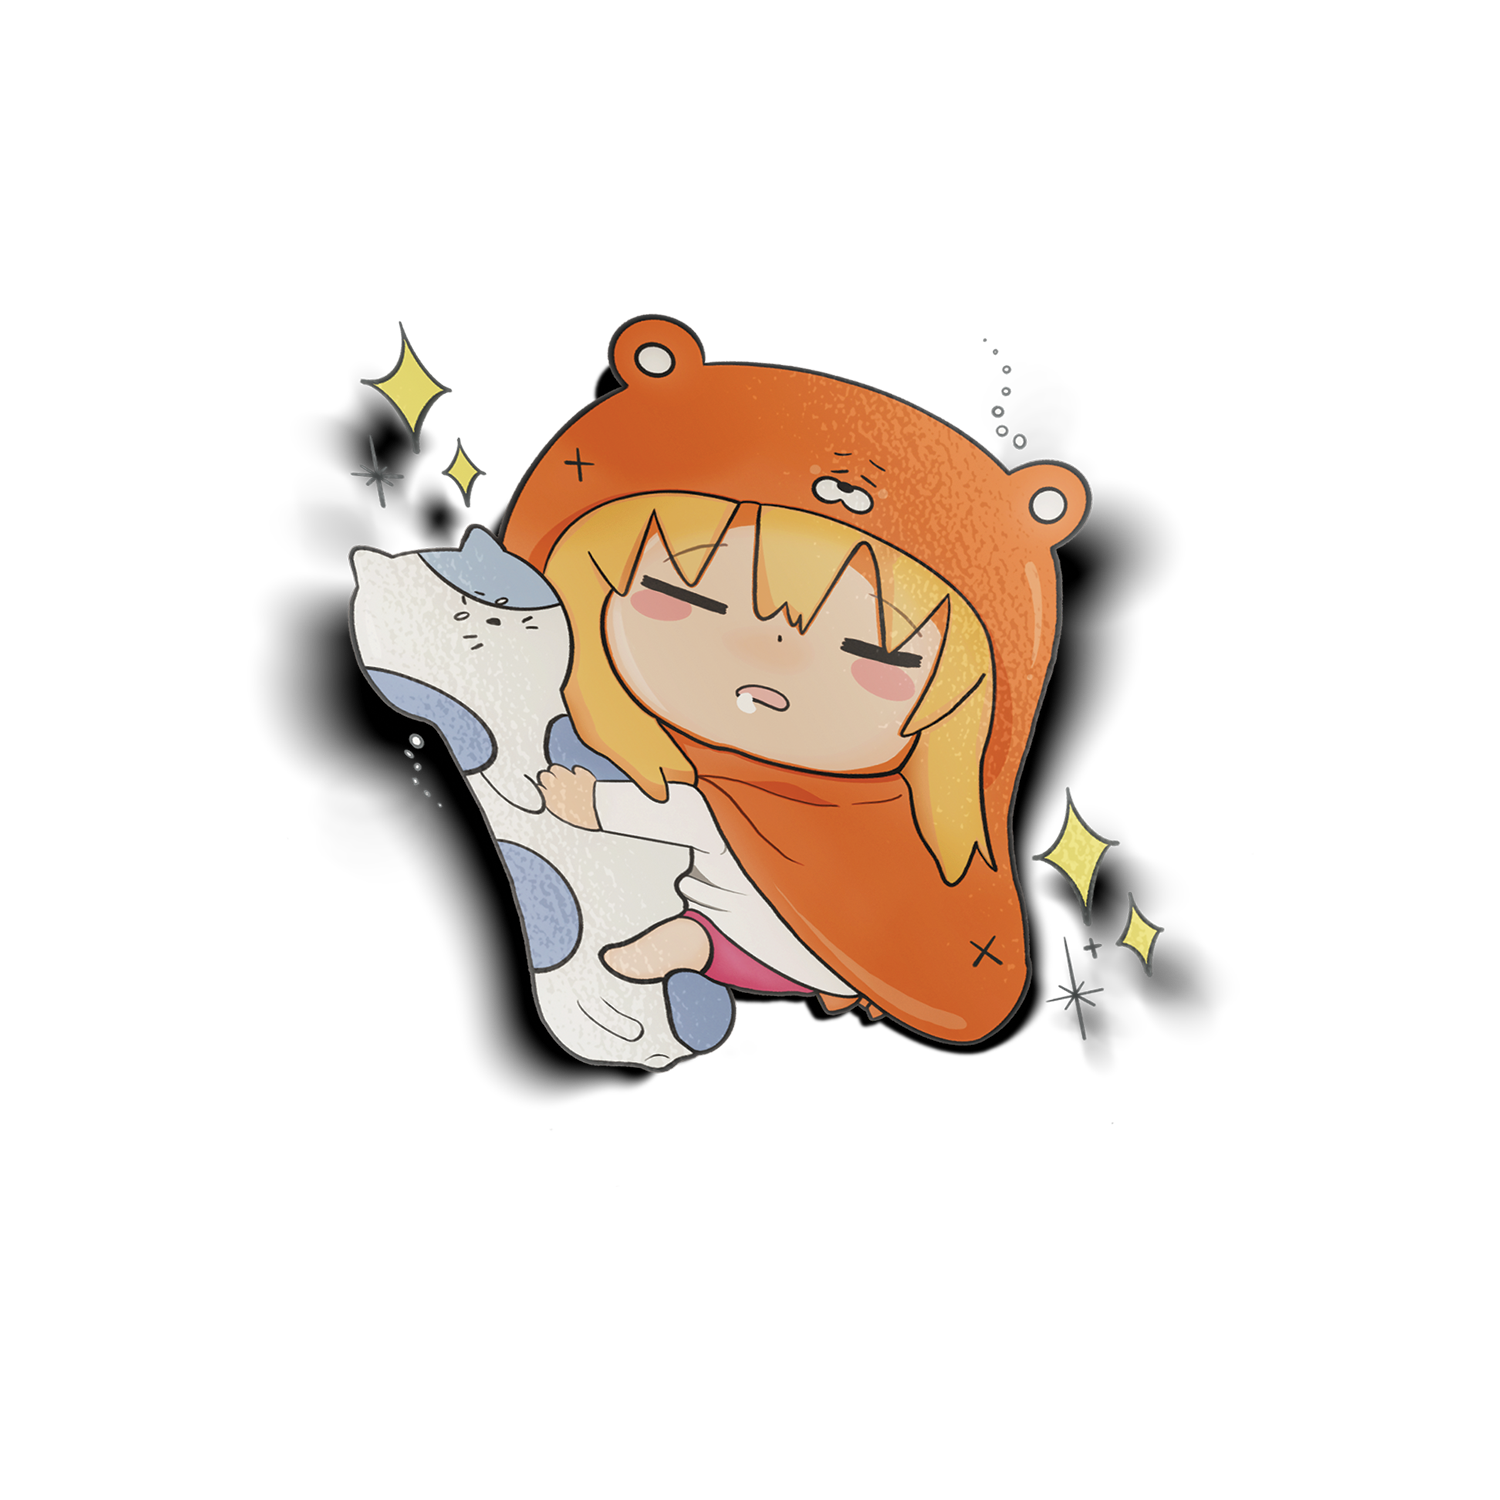 Sleeping Umaru Keychain design features Umaru from Himouto! Umaru-Chan sleeping with her long cat plushie and yellow sparkles.